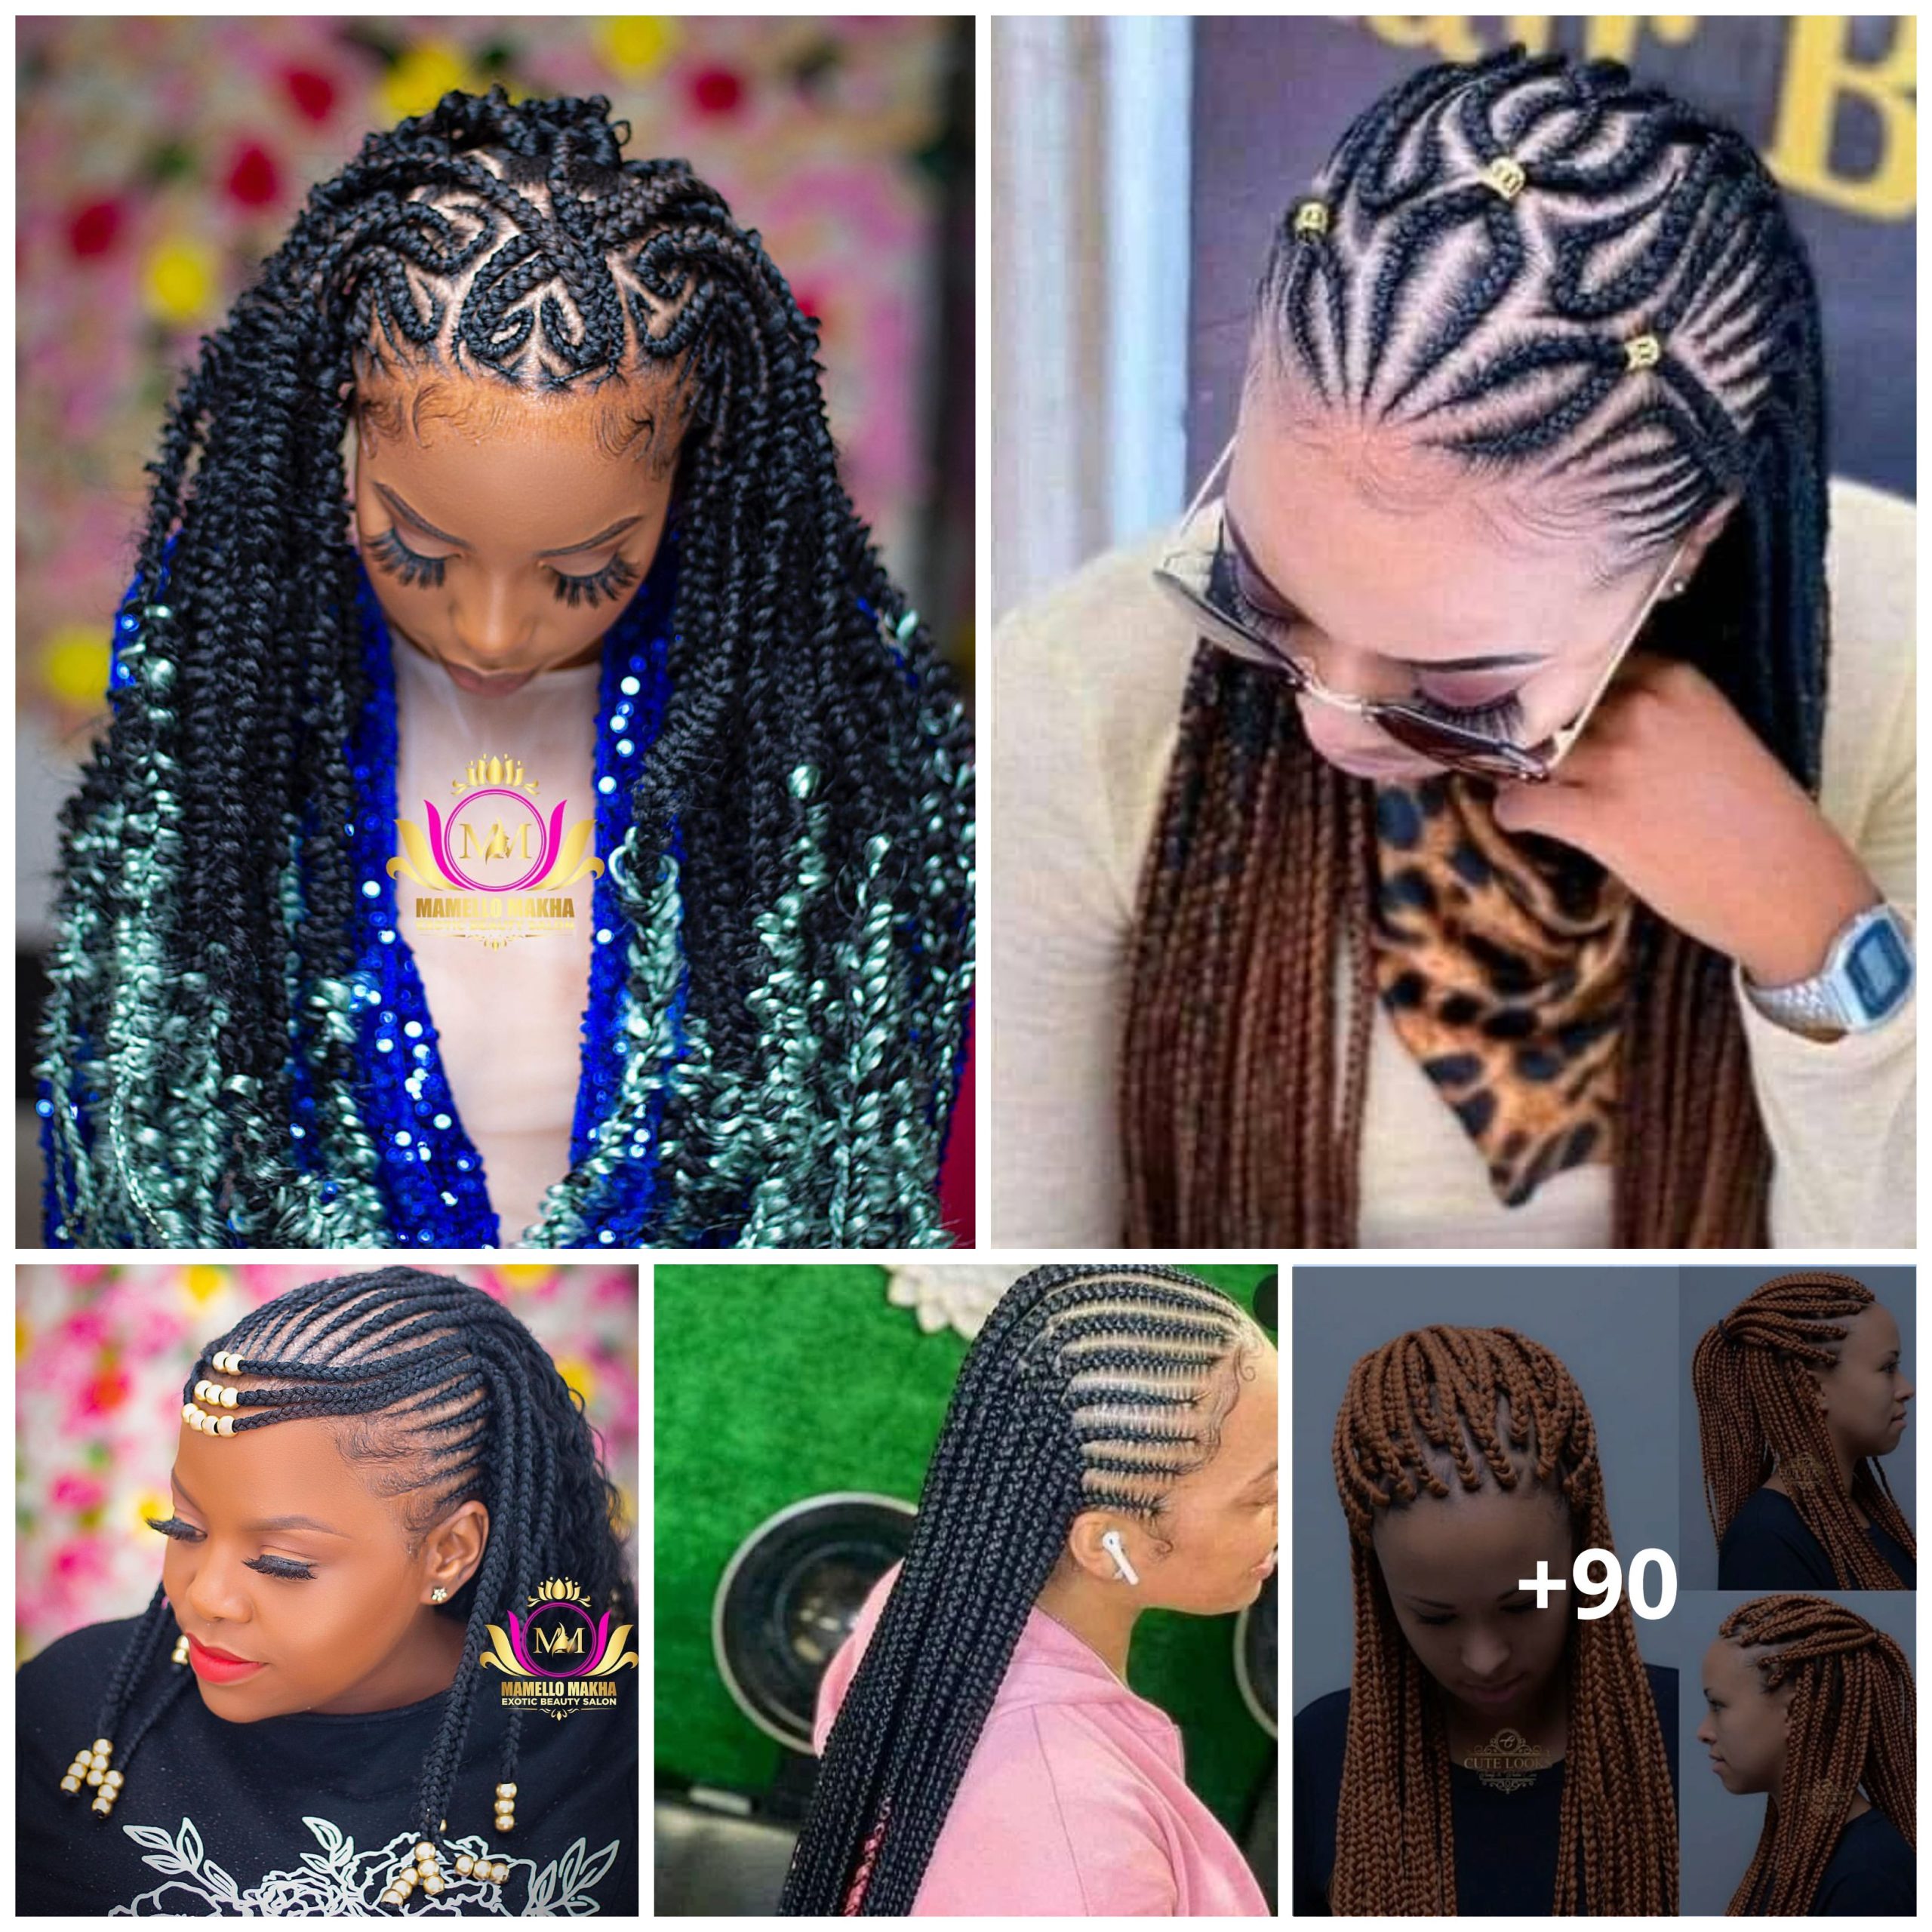 90+ Captivating Braided Hairstyles to Highlight the Beauty of African Hair!